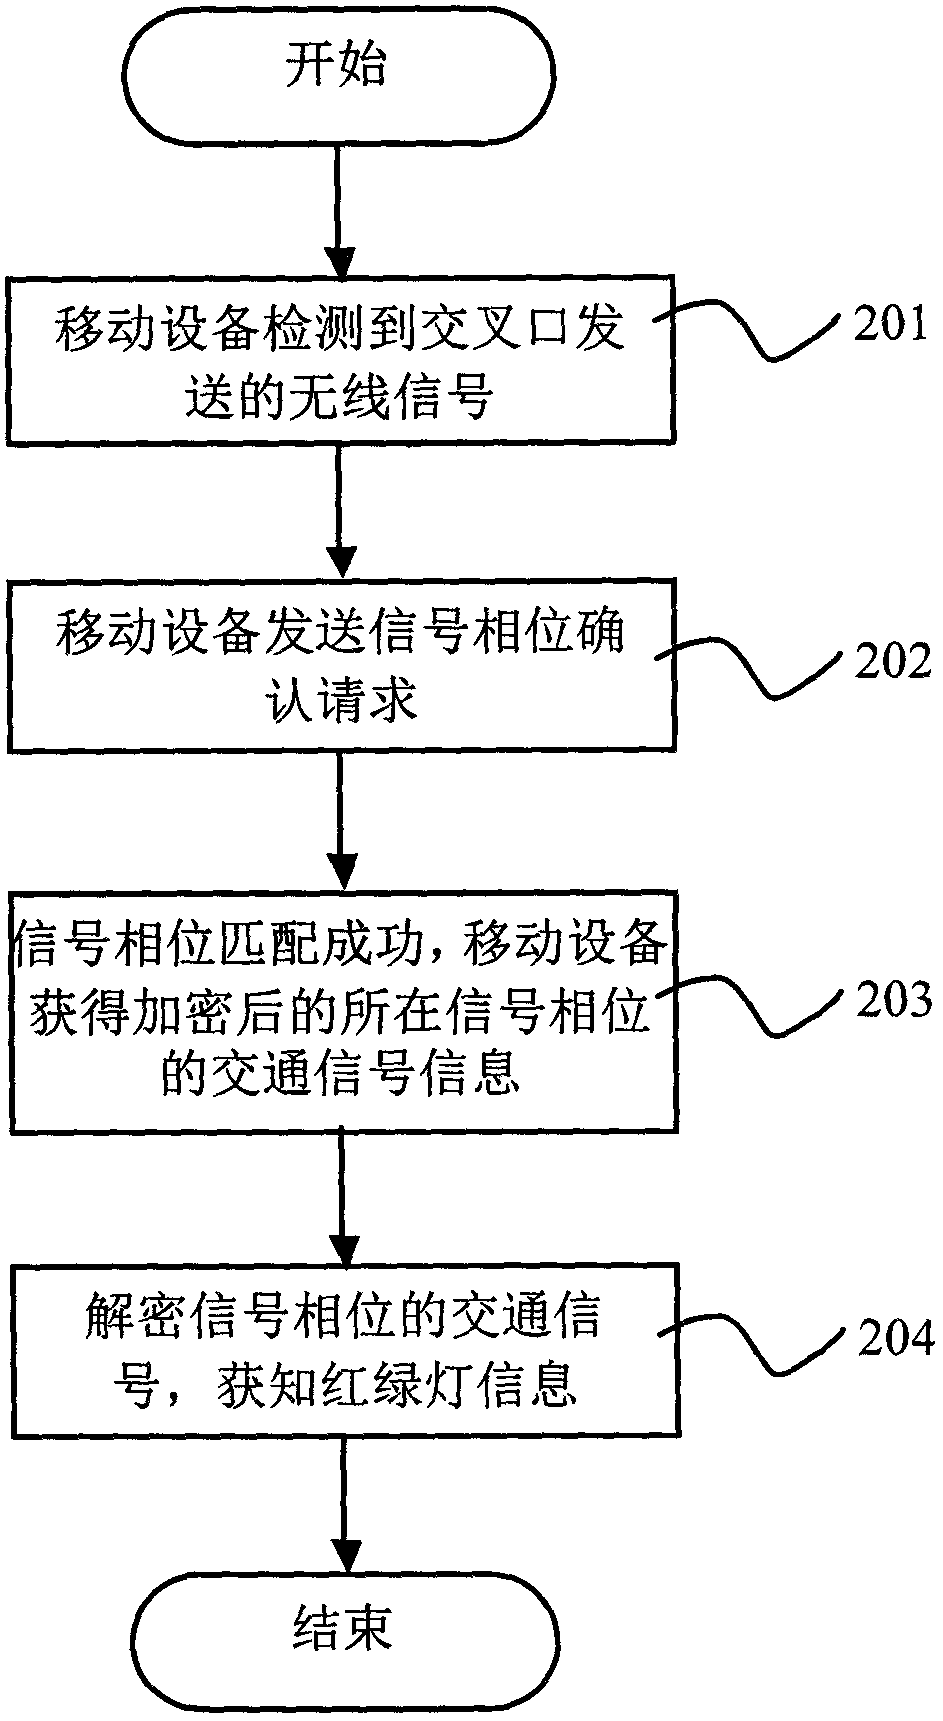 Method and system for mobile equipment to sense traffic signals on traveling path